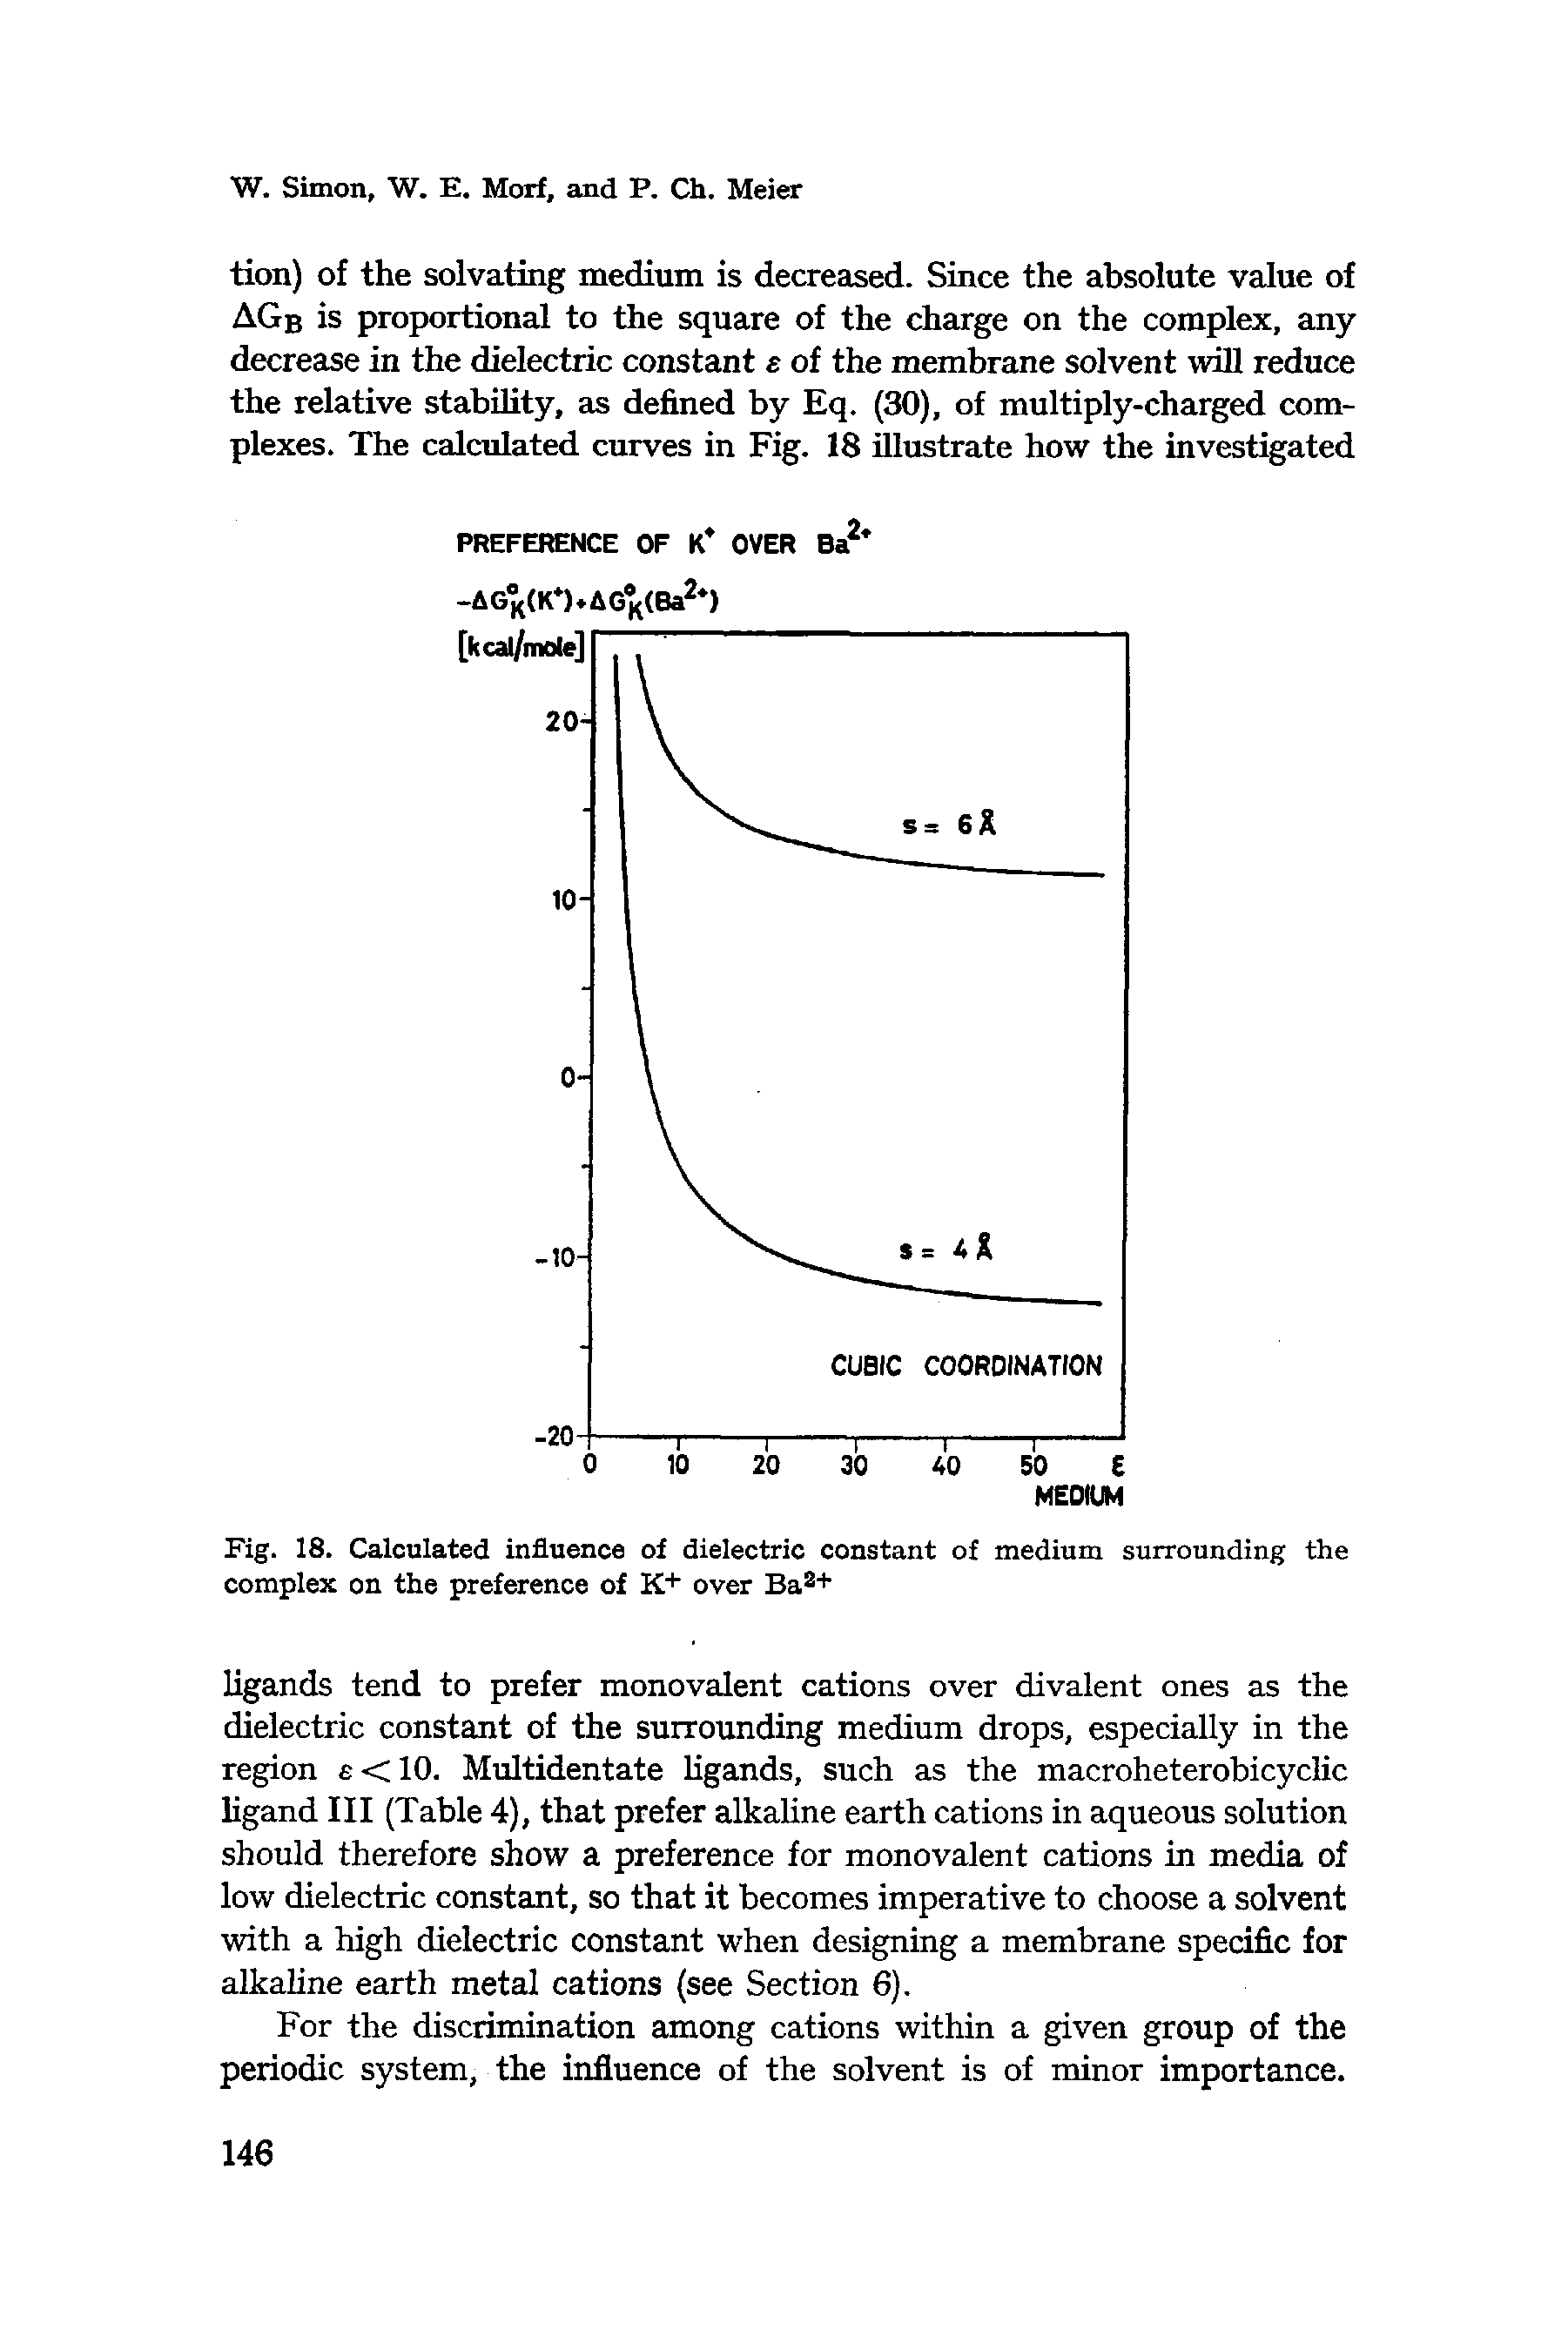 Fig. 18. Calculated influence of dielectric constant of medium surrounding the complex on the preference of K+ over Baa+...